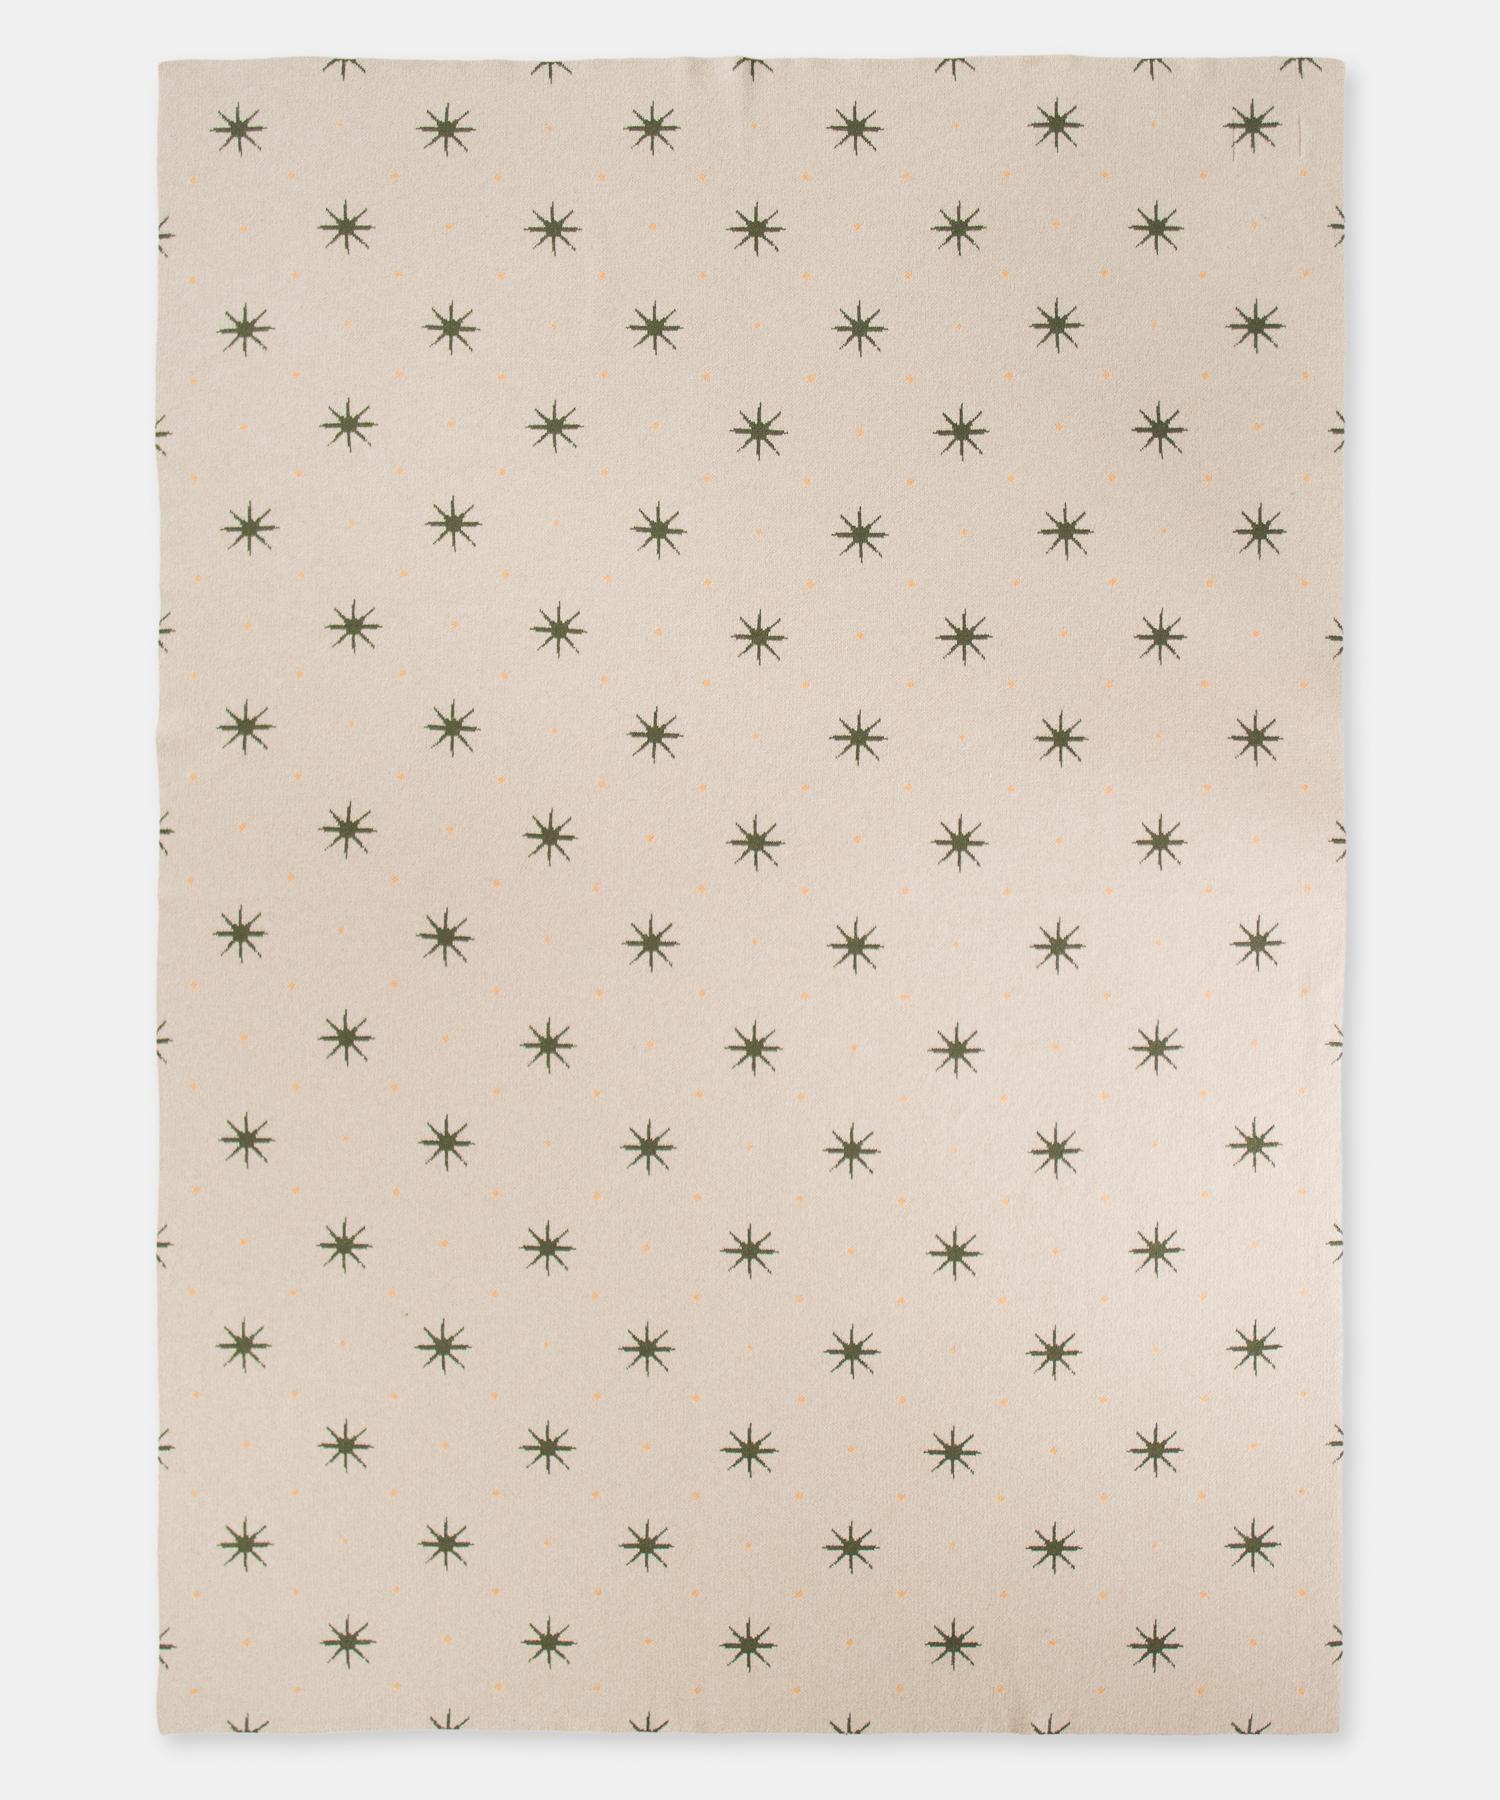 Green Stars Cashmere Throw by Saved, New York

100% Cashmere. A classic design inspired by a 1960s wallpaper with green stars and yellow dots. Available in King and Queen sizes, please inquire for pricing, availability, and lead time.